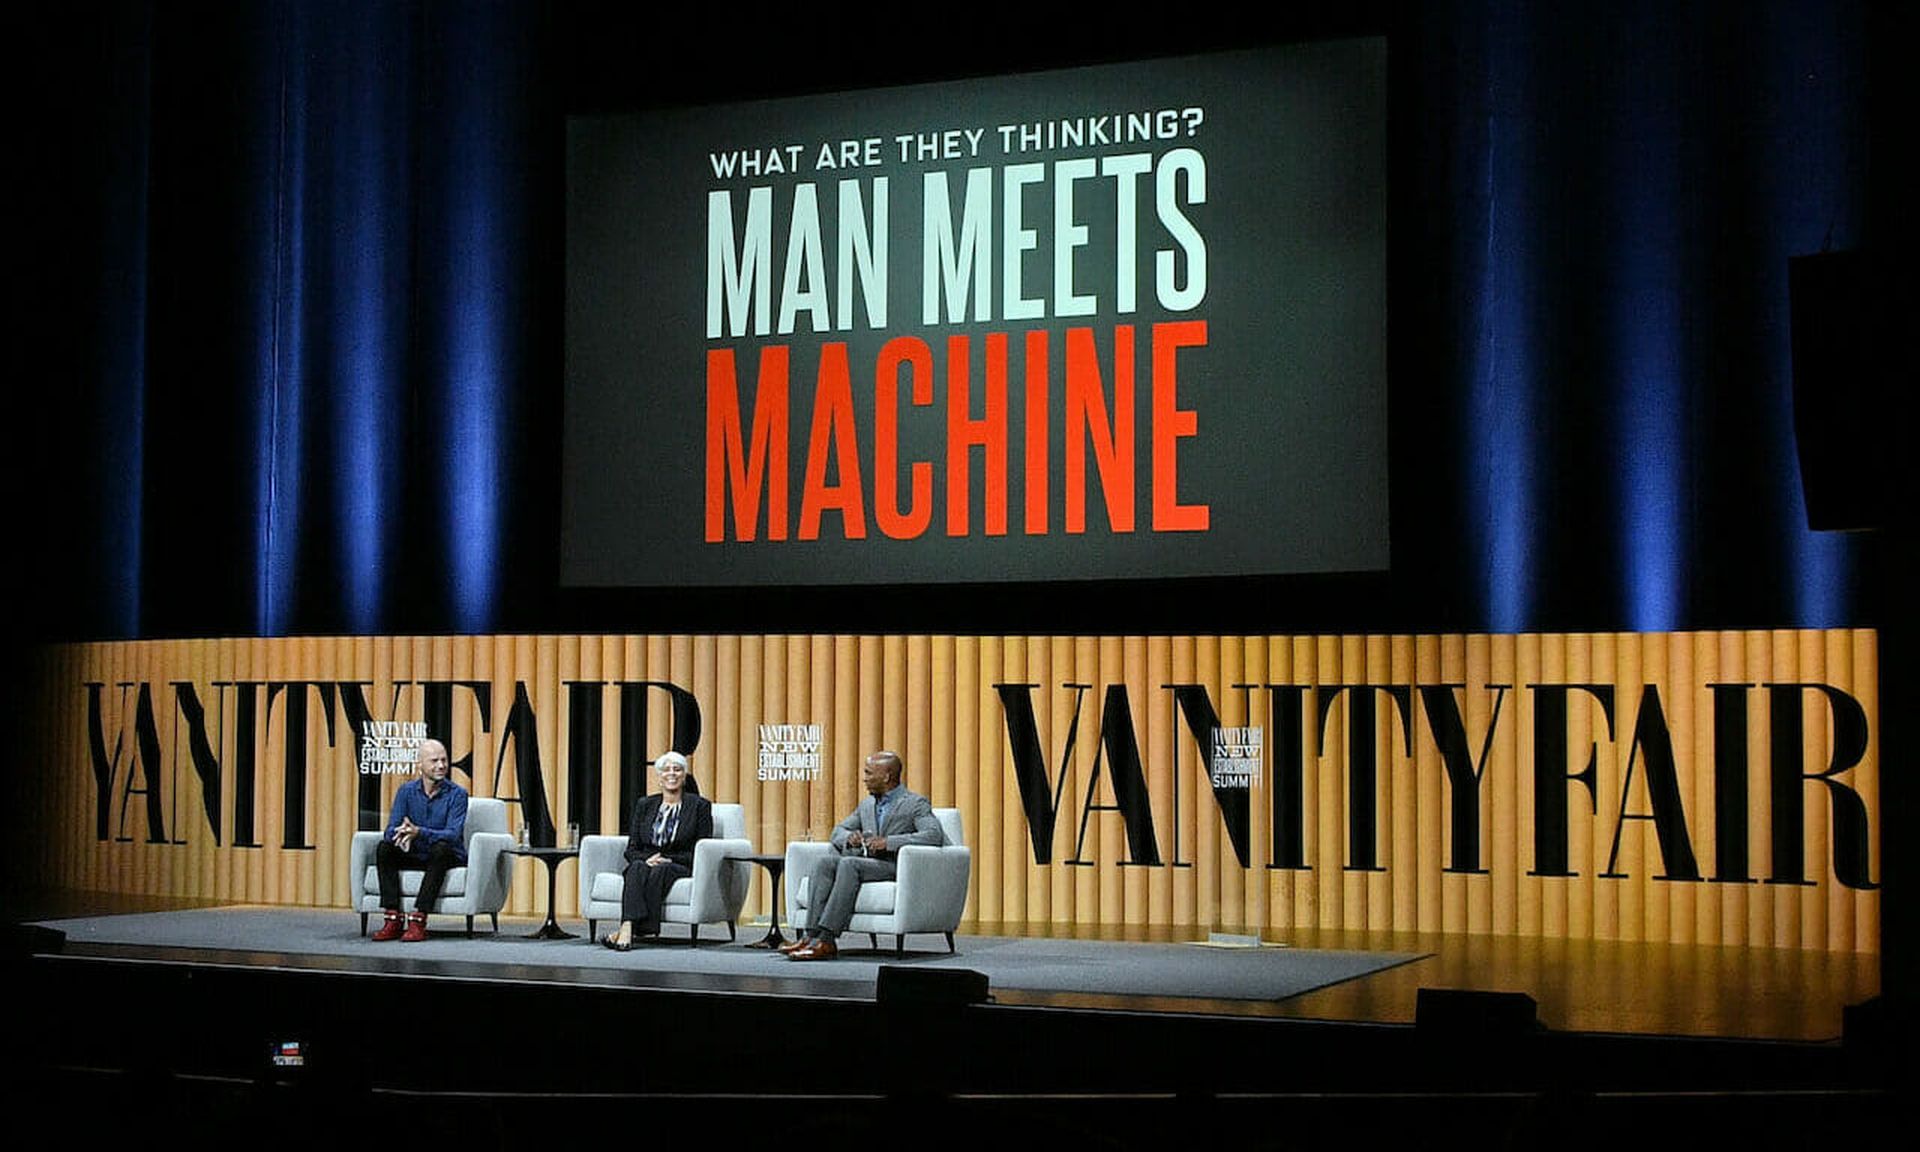 Former director of DARPA, Arati Prabhakar, joins others on stage during &#8220;What Are They Thinking? Man Meets Machine&#8221; at the Vanity Fair New Establishment Summit in San Francisco, California. The research and development arm for the Department of Defense have successfully demonstrated a limited set of use cases for applying zero-knowledge...